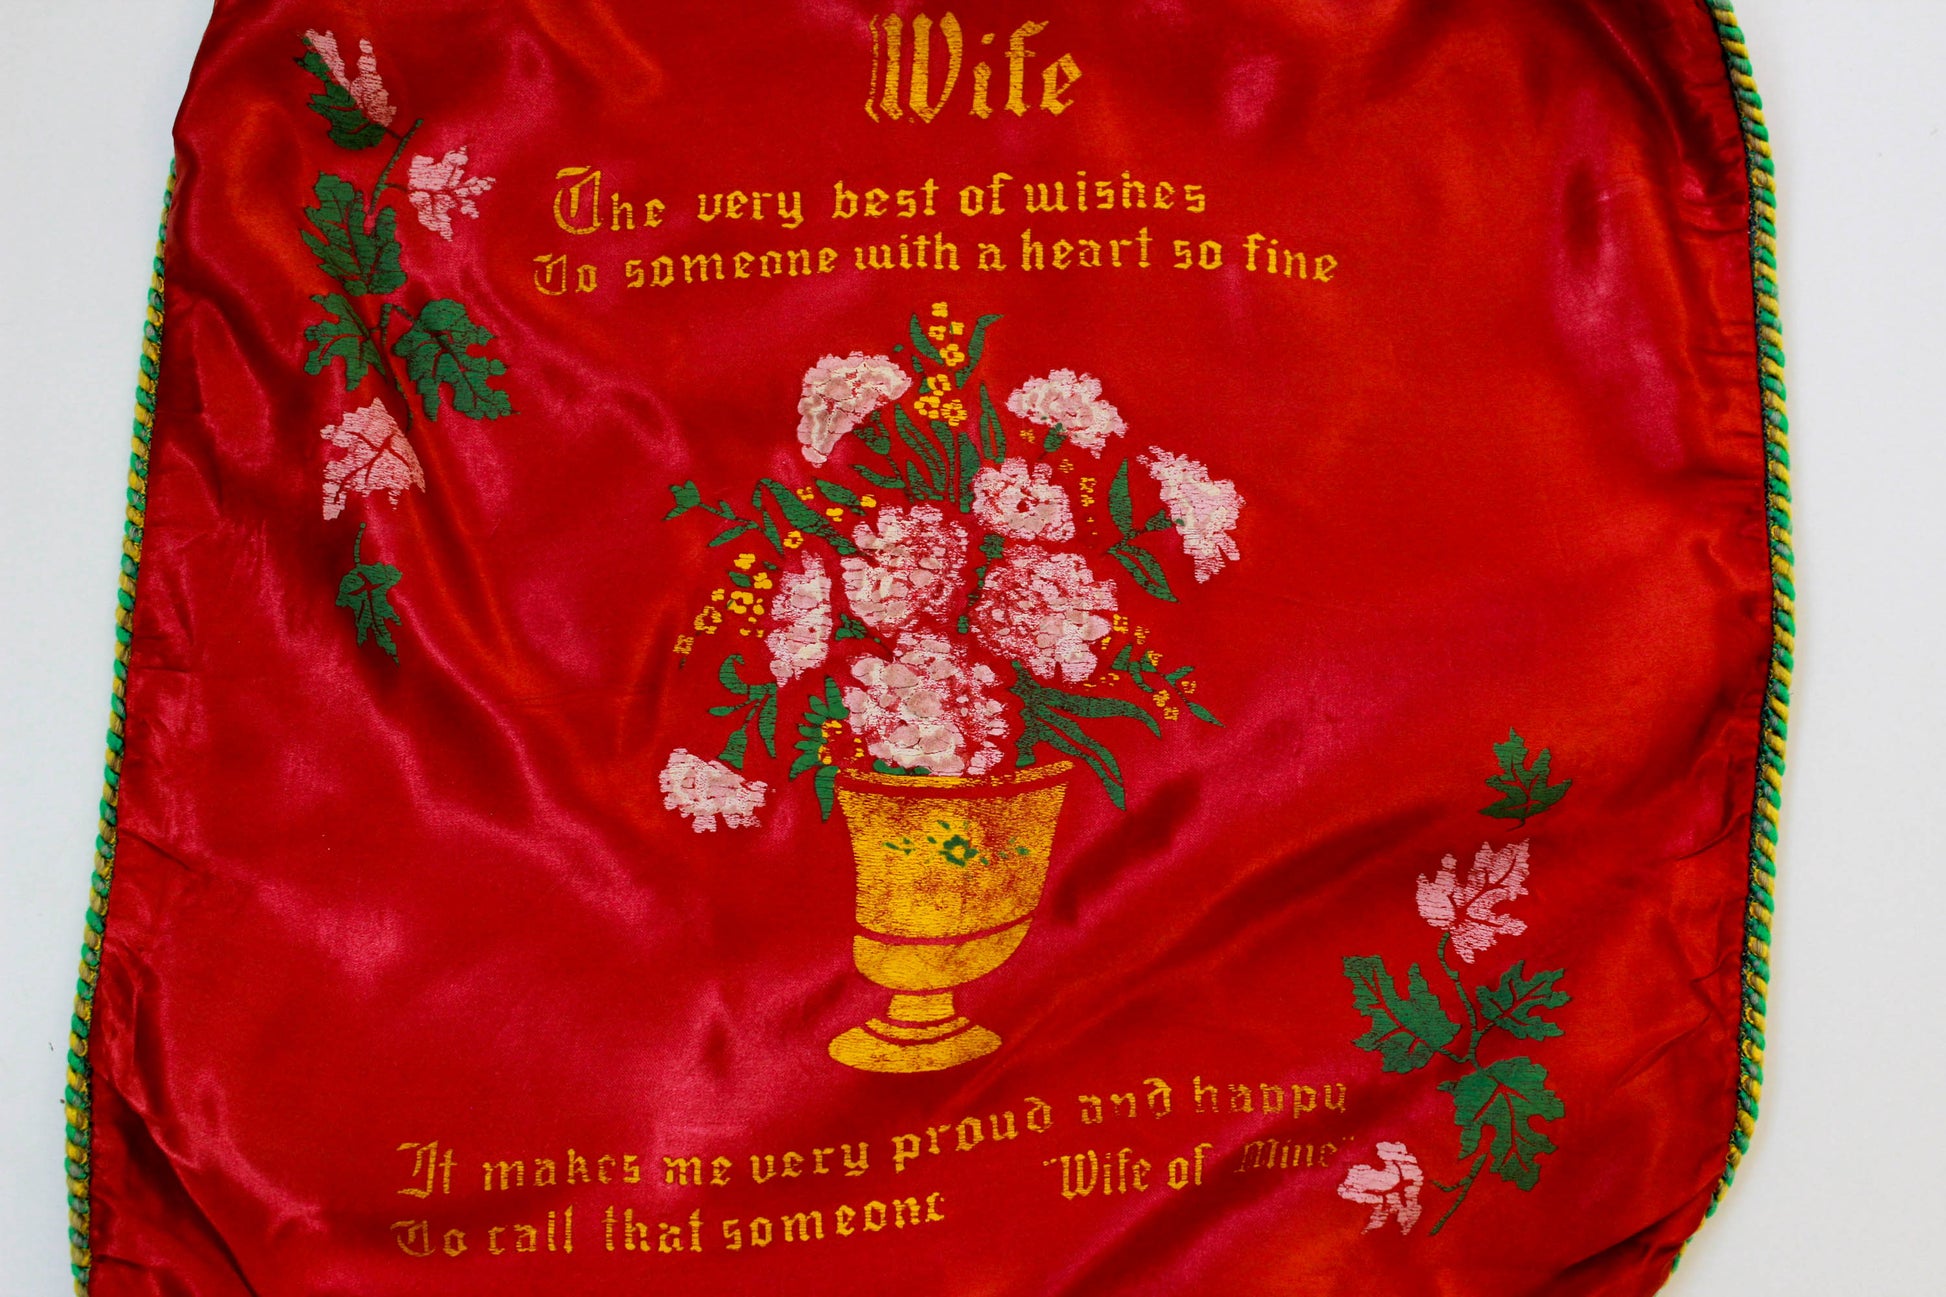 1940s rayon satin hand painted bouquet souvenir pillowcase with wife love poem, wwii era  